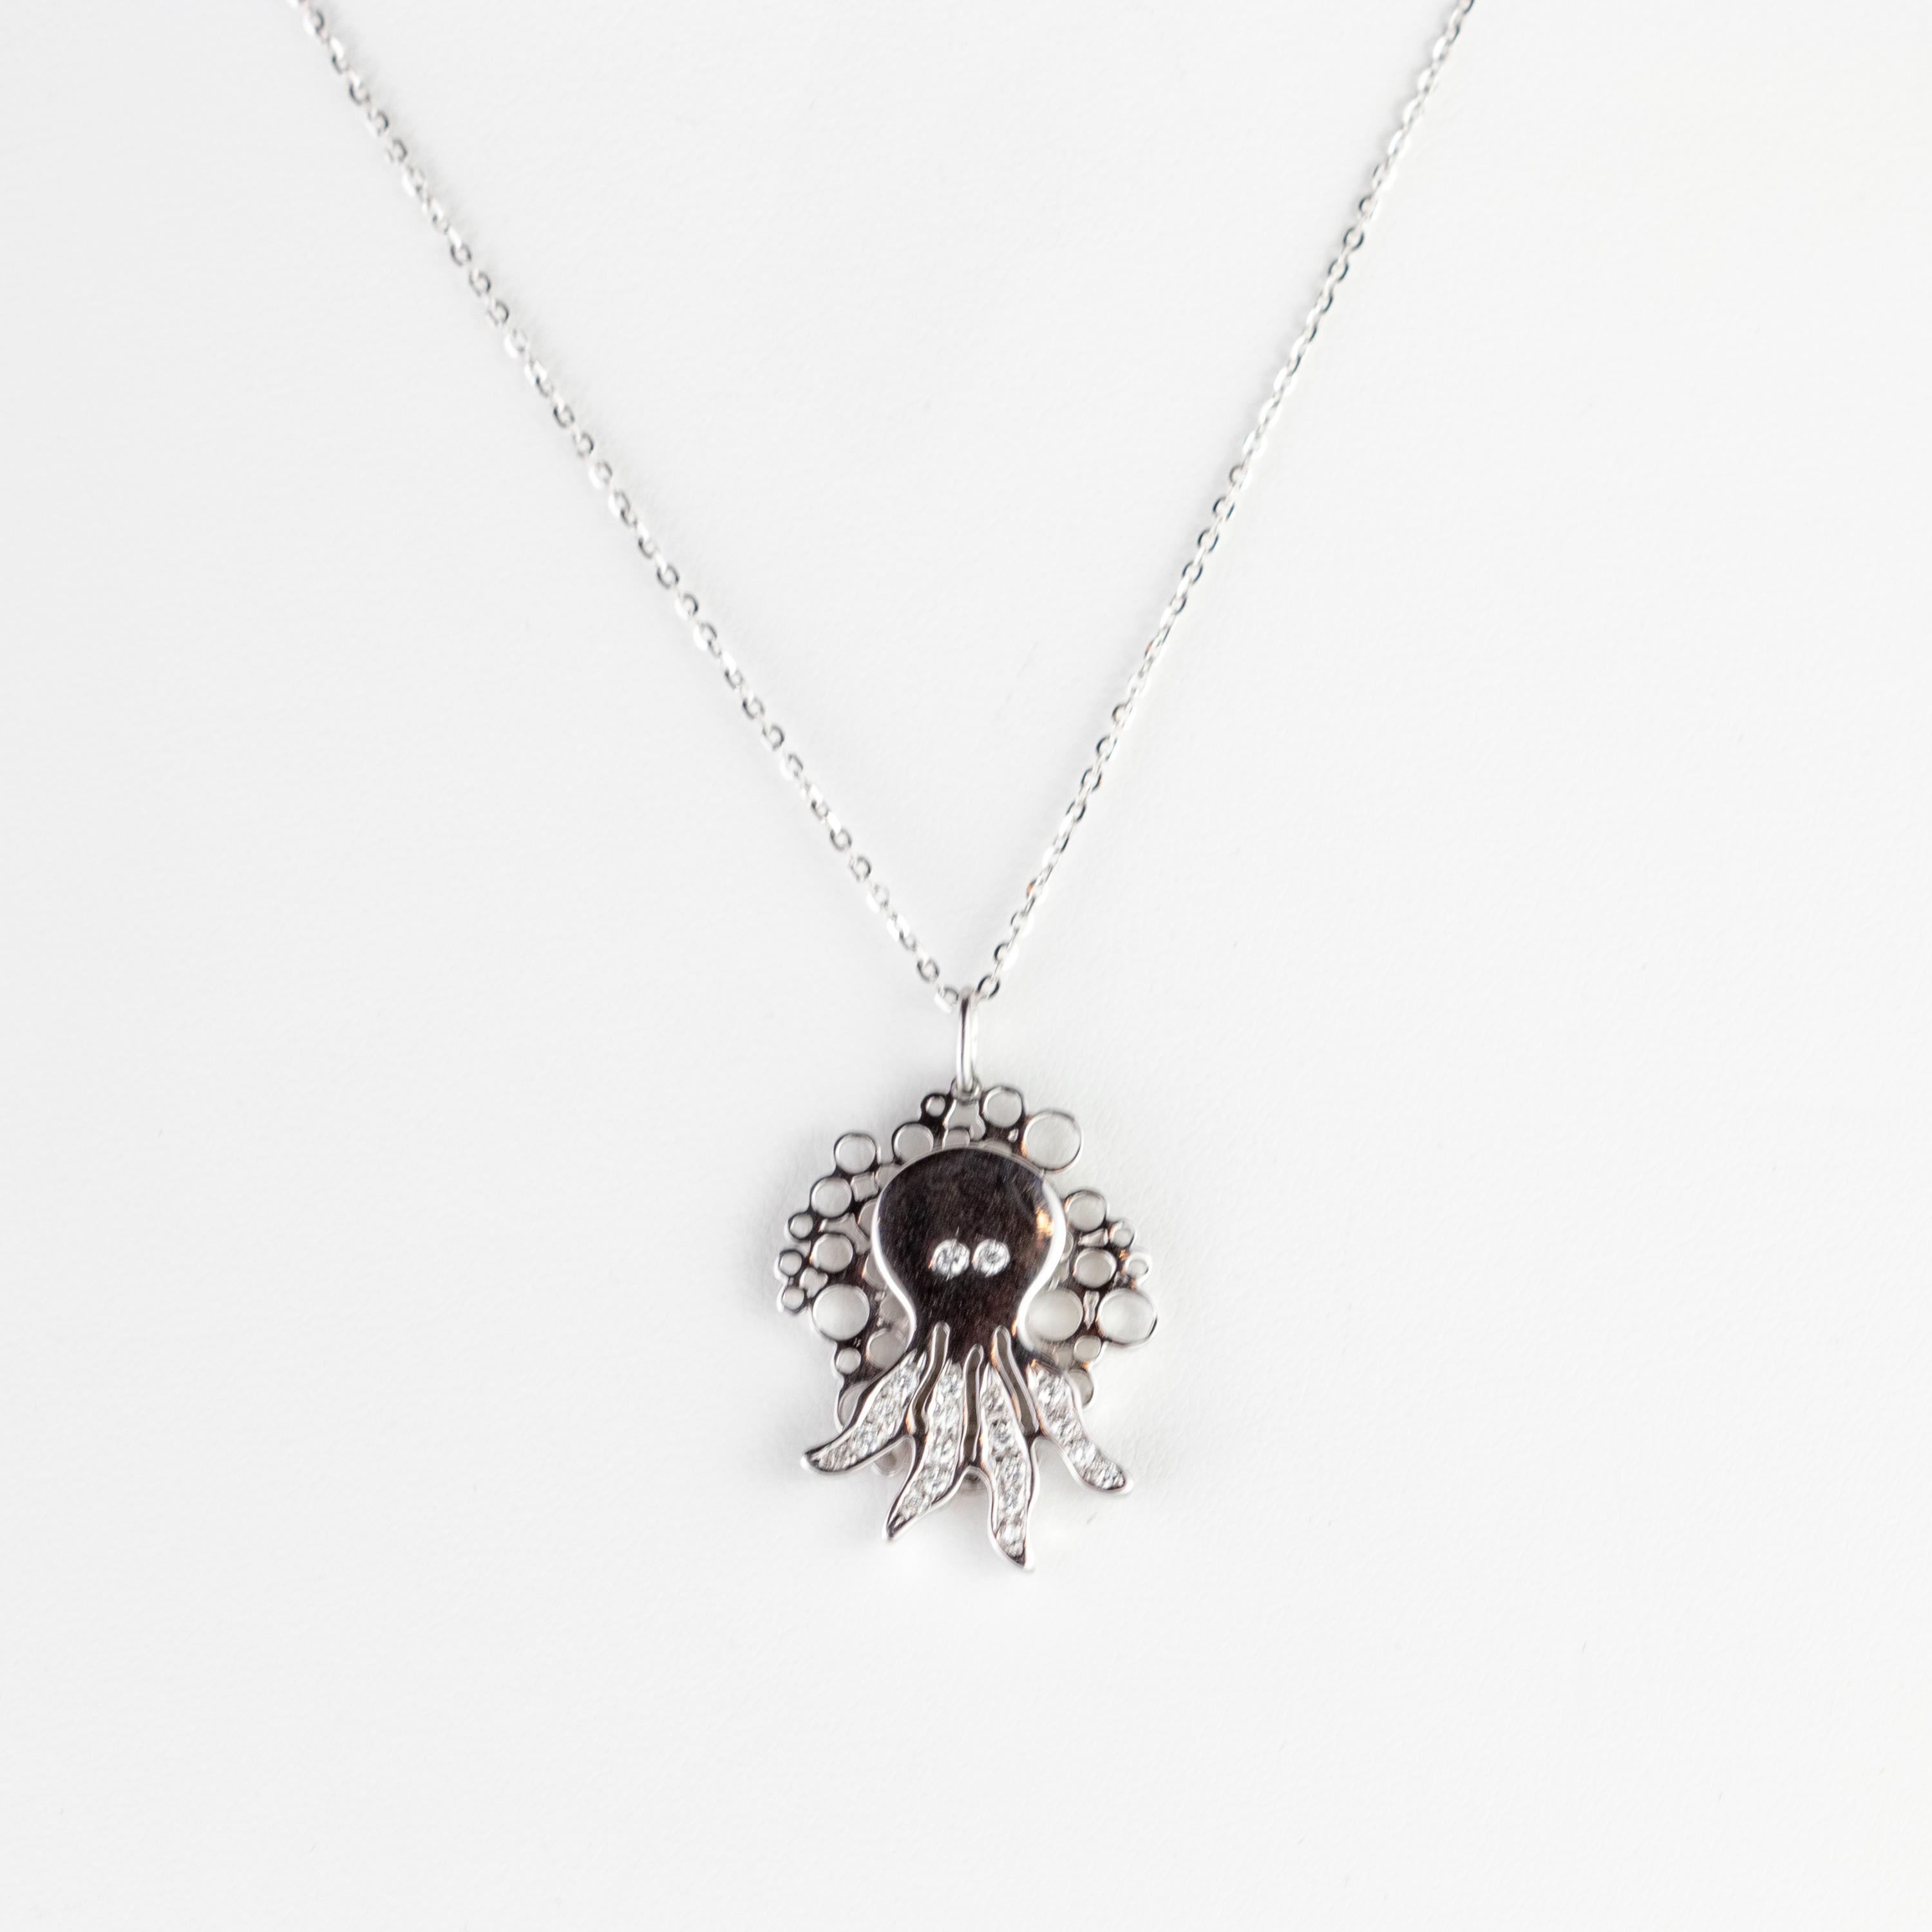 Elegant and minimalistic one-of-a-kind necklace with a carved octopus  pendant. Handmade jewels that highlight a magnificent creature with 2 diamond eyes and 4 tentacles full of 0.3 carat diamonds. Setted in a woven evoking the splendid sea corals